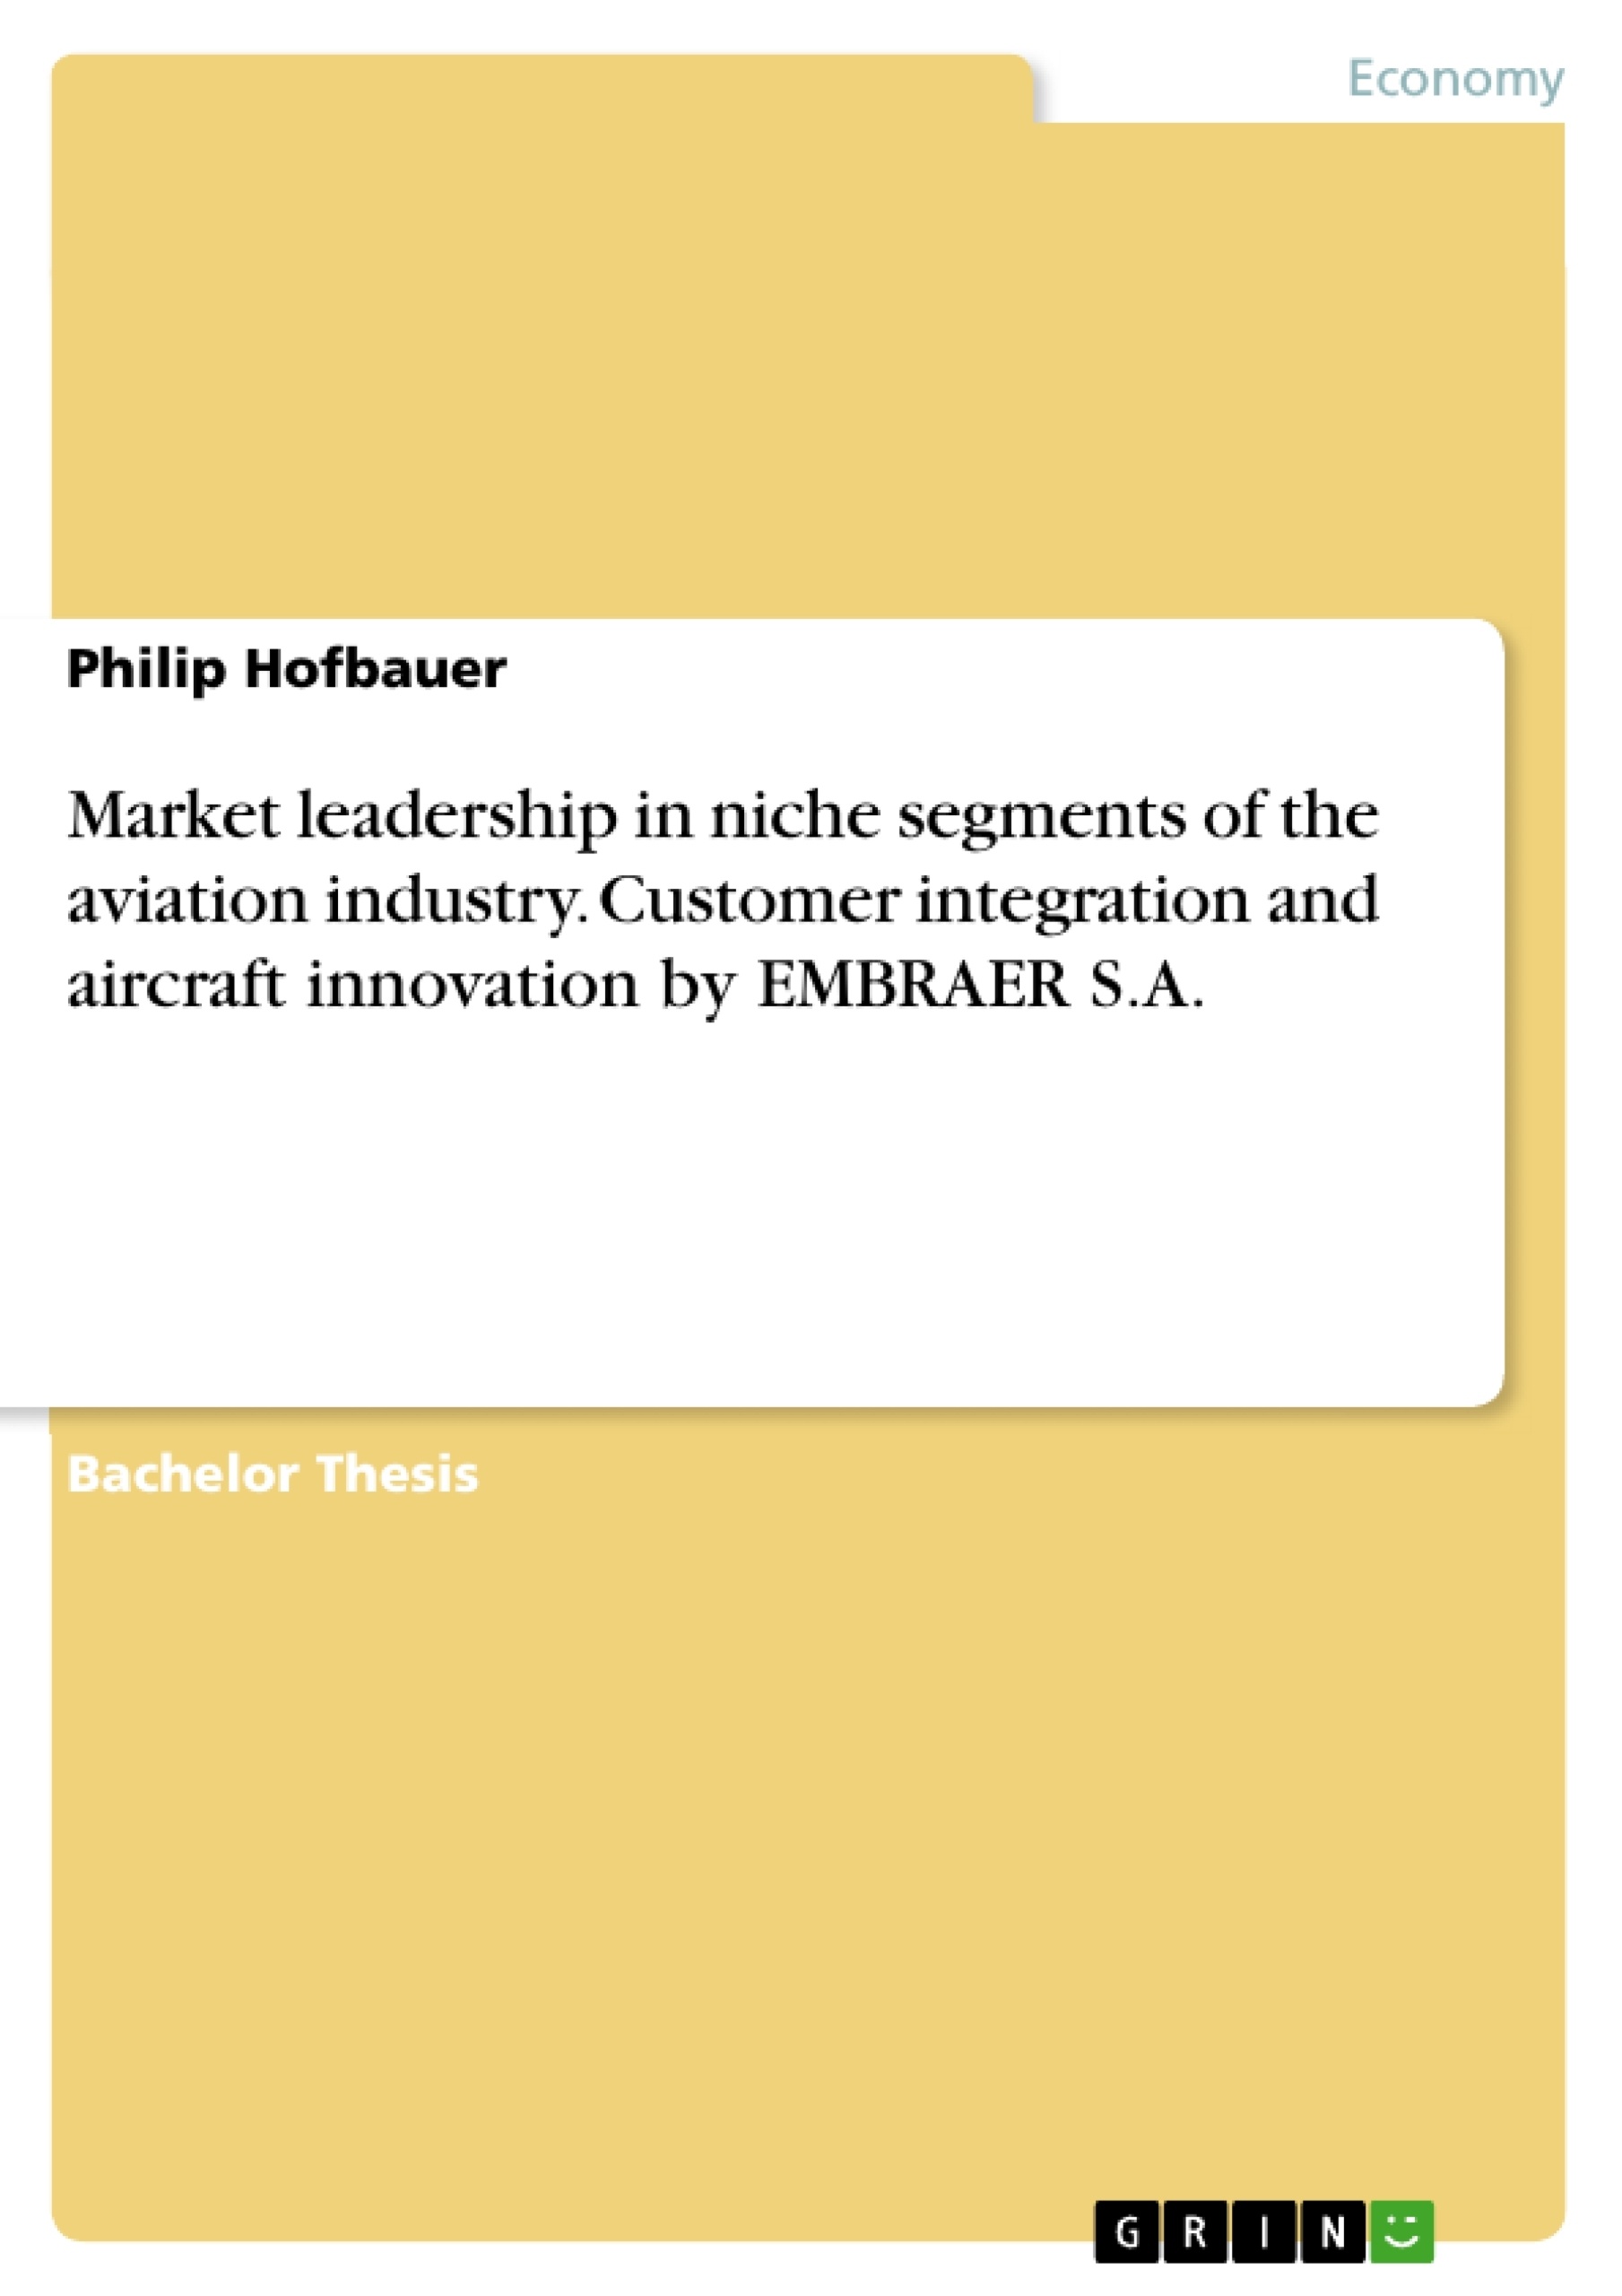 Título: Market leadership in niche segments of the aviation industry. Customer integration and aircraft innovation by EMBRAER S.A.